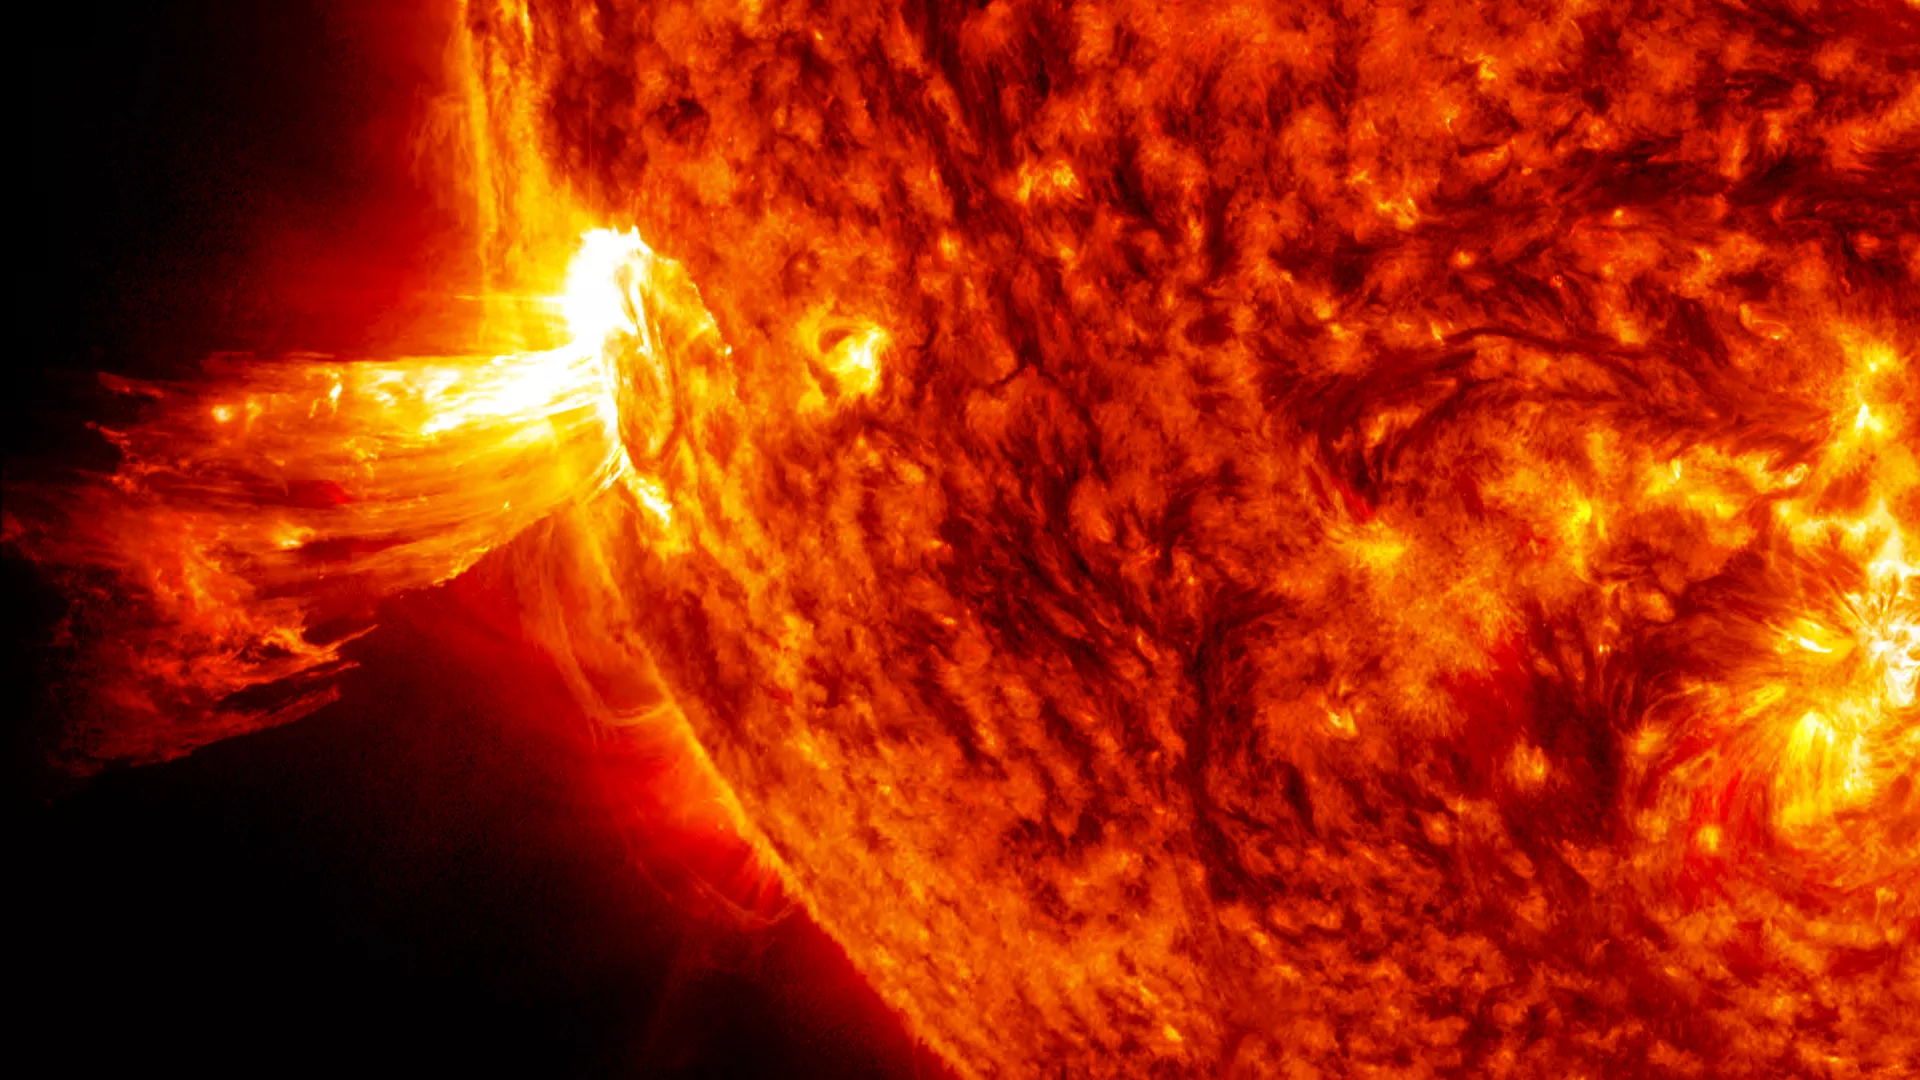 Image of a solar flare on the sun